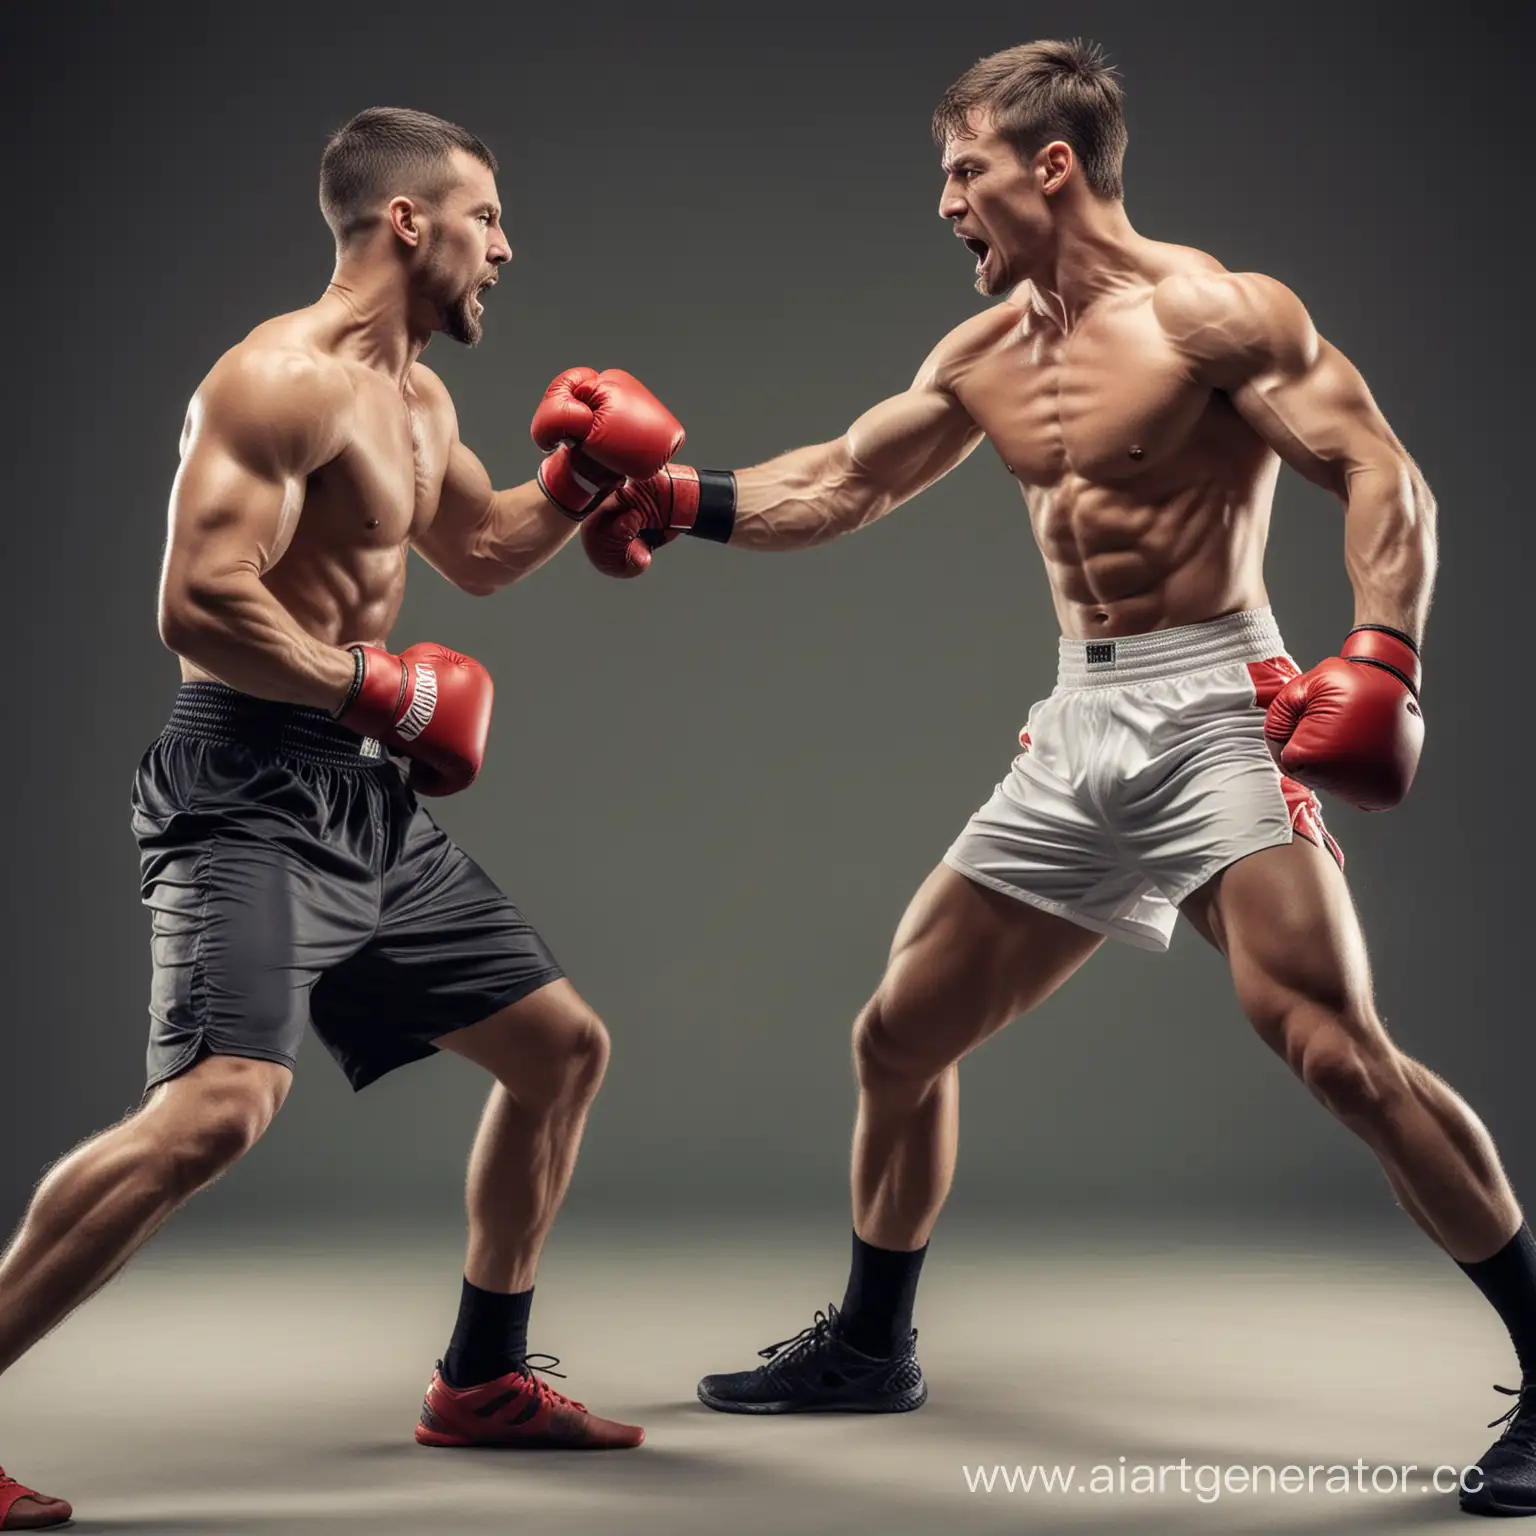 Intense-Athletic-Showdown-Two-Men-Engaged-in-Combat